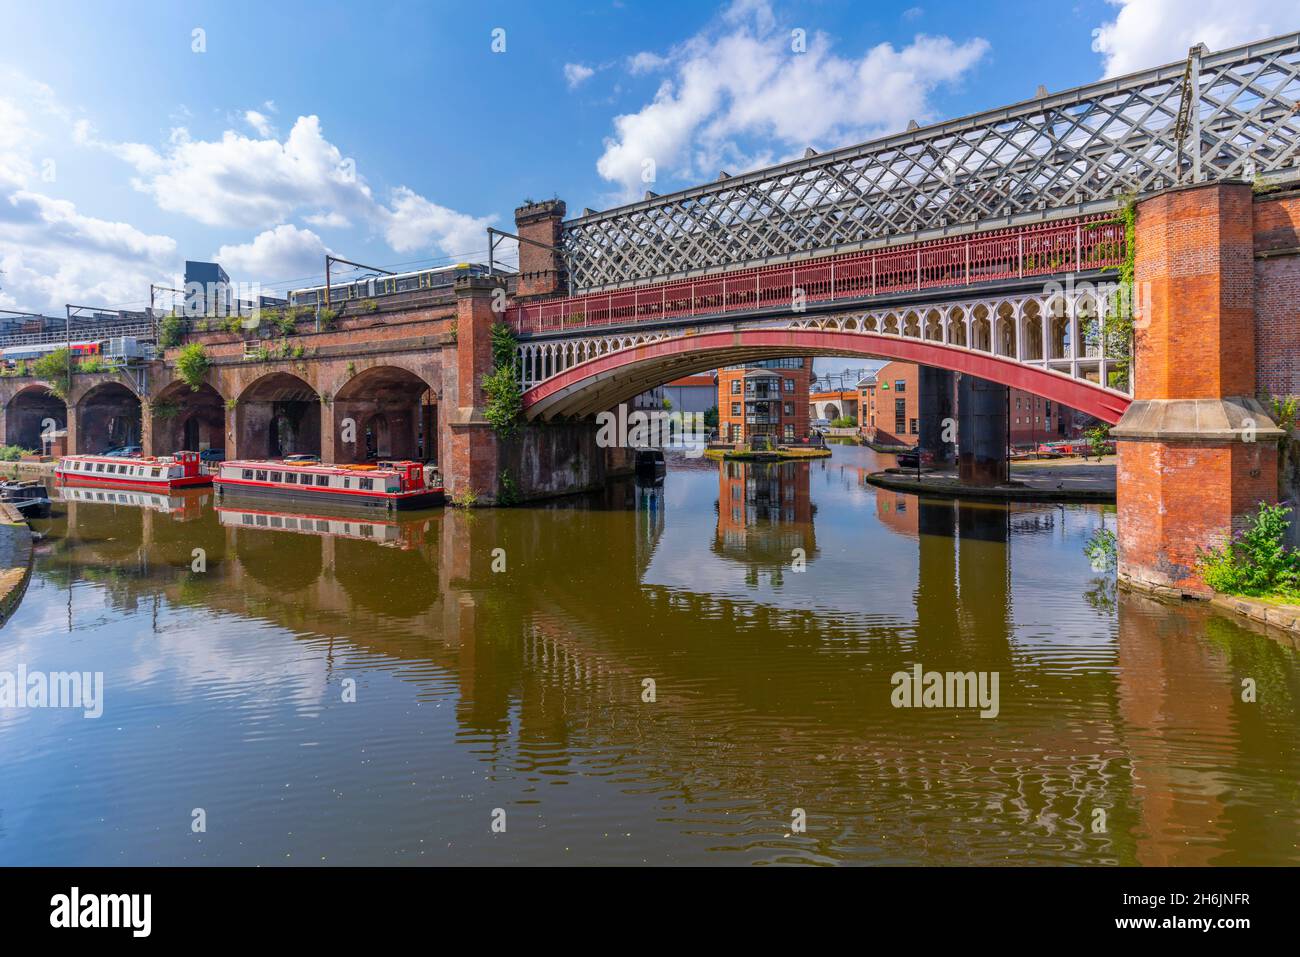 View of tram and train bridges reflecting in Castlefield Canal, Castlefield, Manchester, England, United Kingdom, Europe Stock Photo